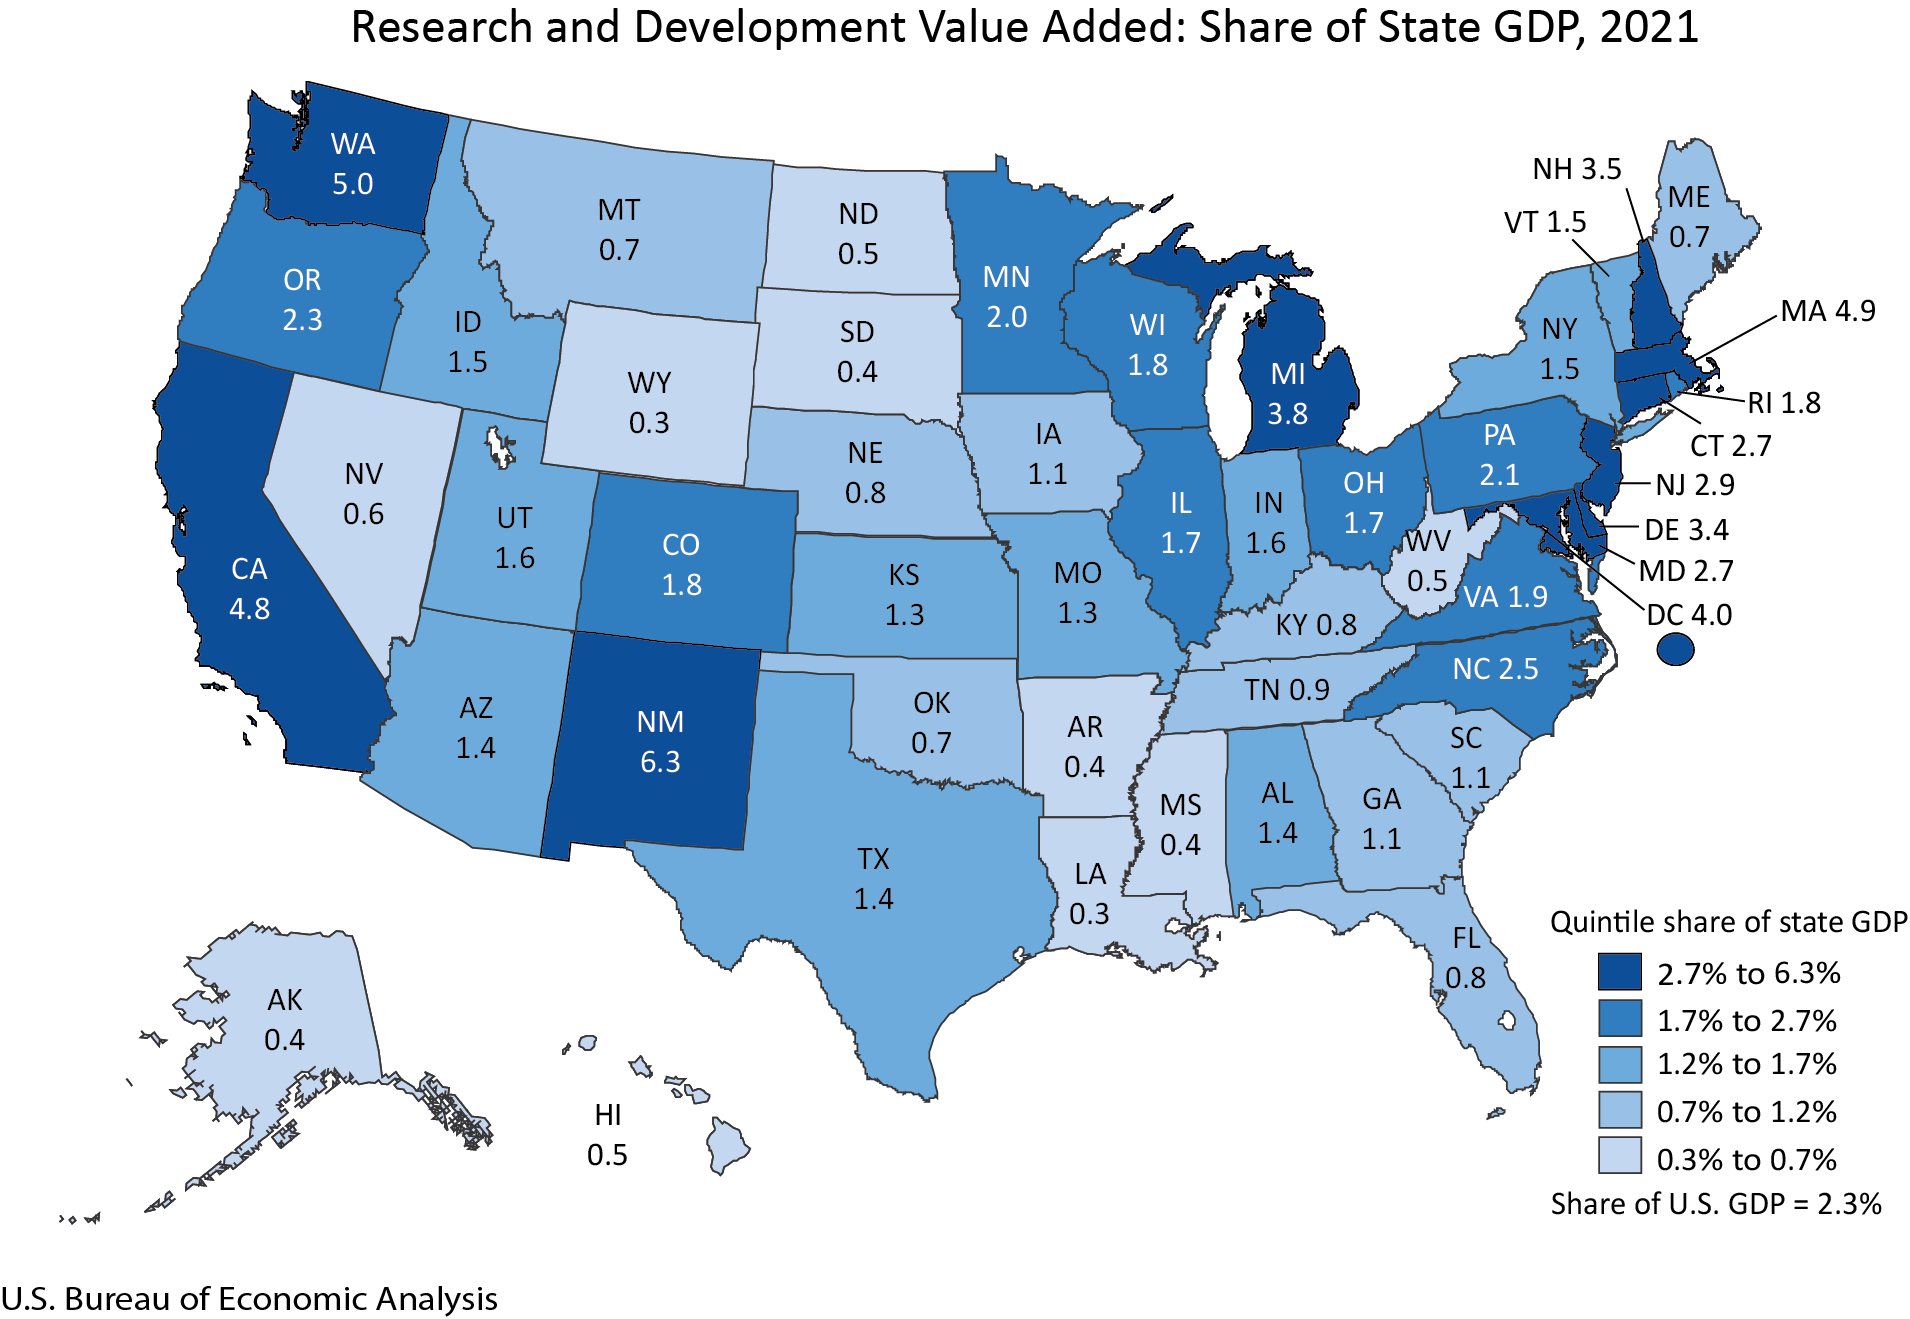 Map value added percent of state GDP